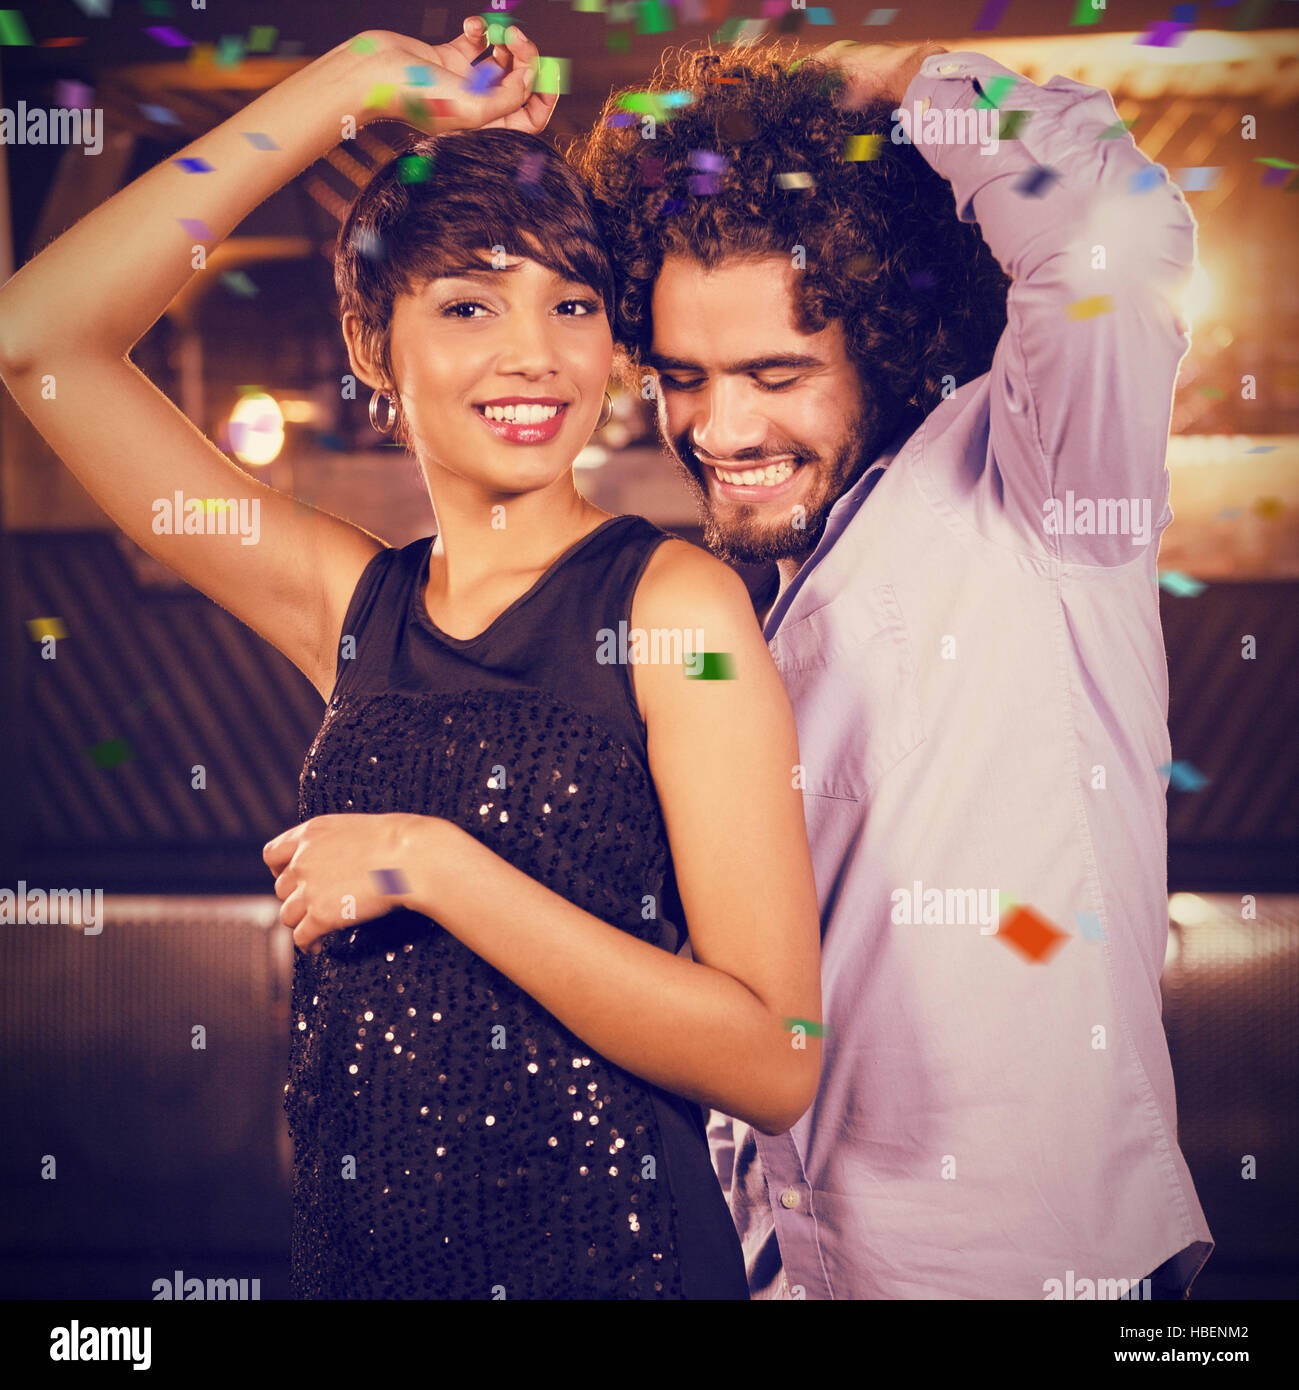 Composite image of cute couple dancing together on dance floor Stock Photo